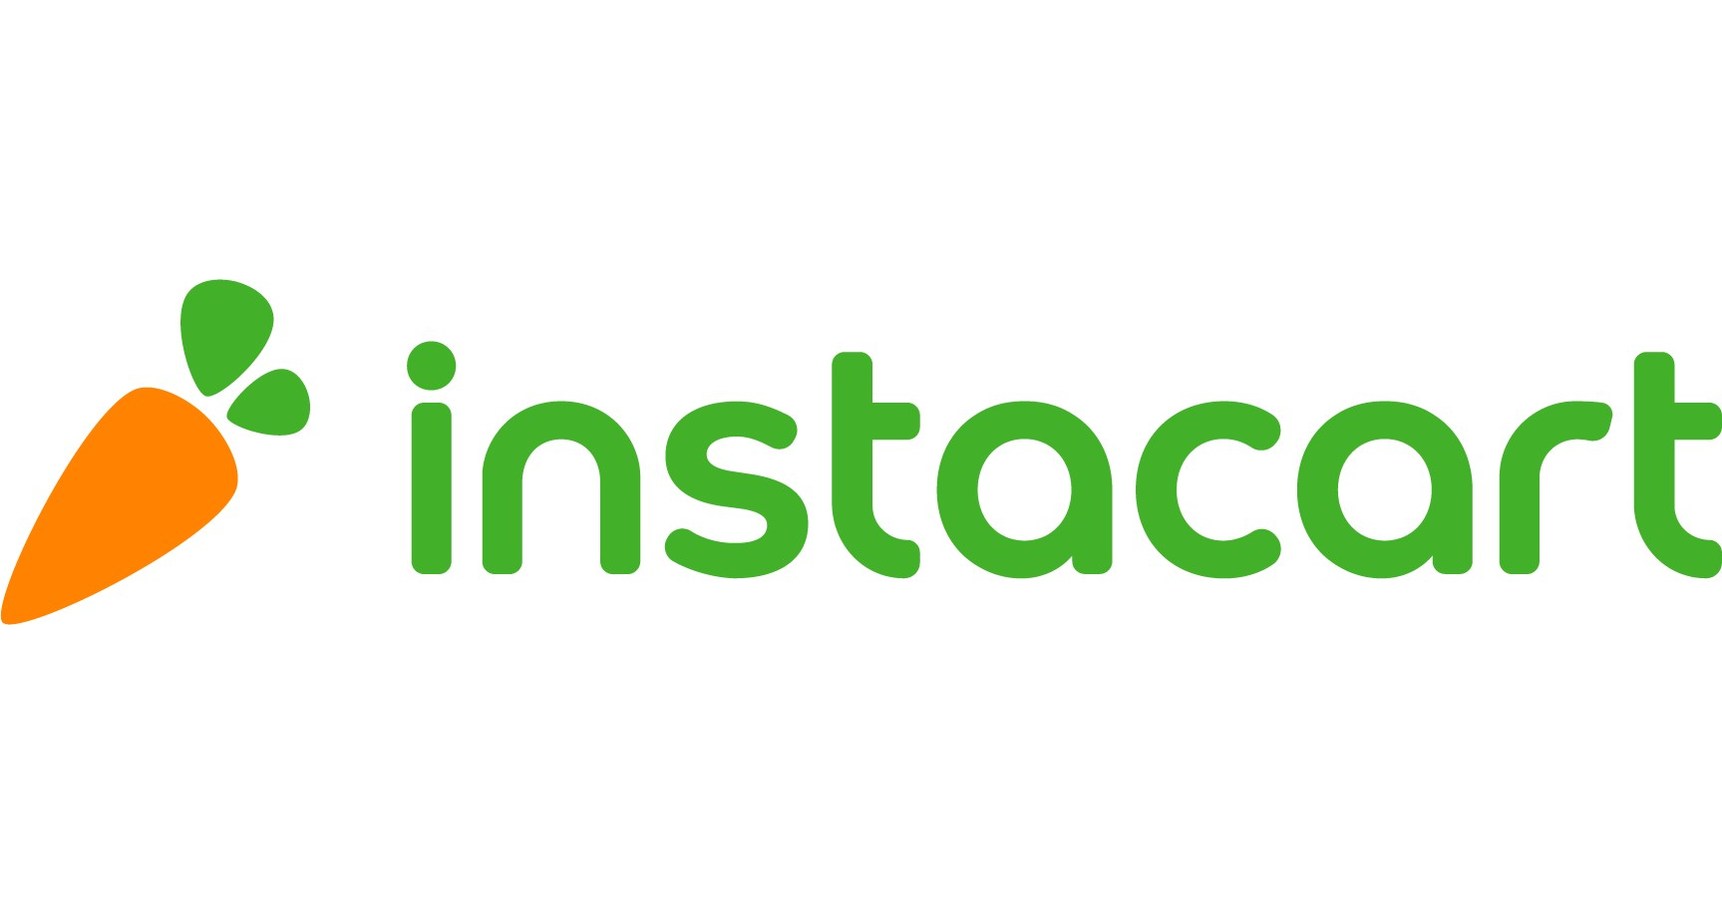 Instacart Started With a Buy Rating at Loop Capital